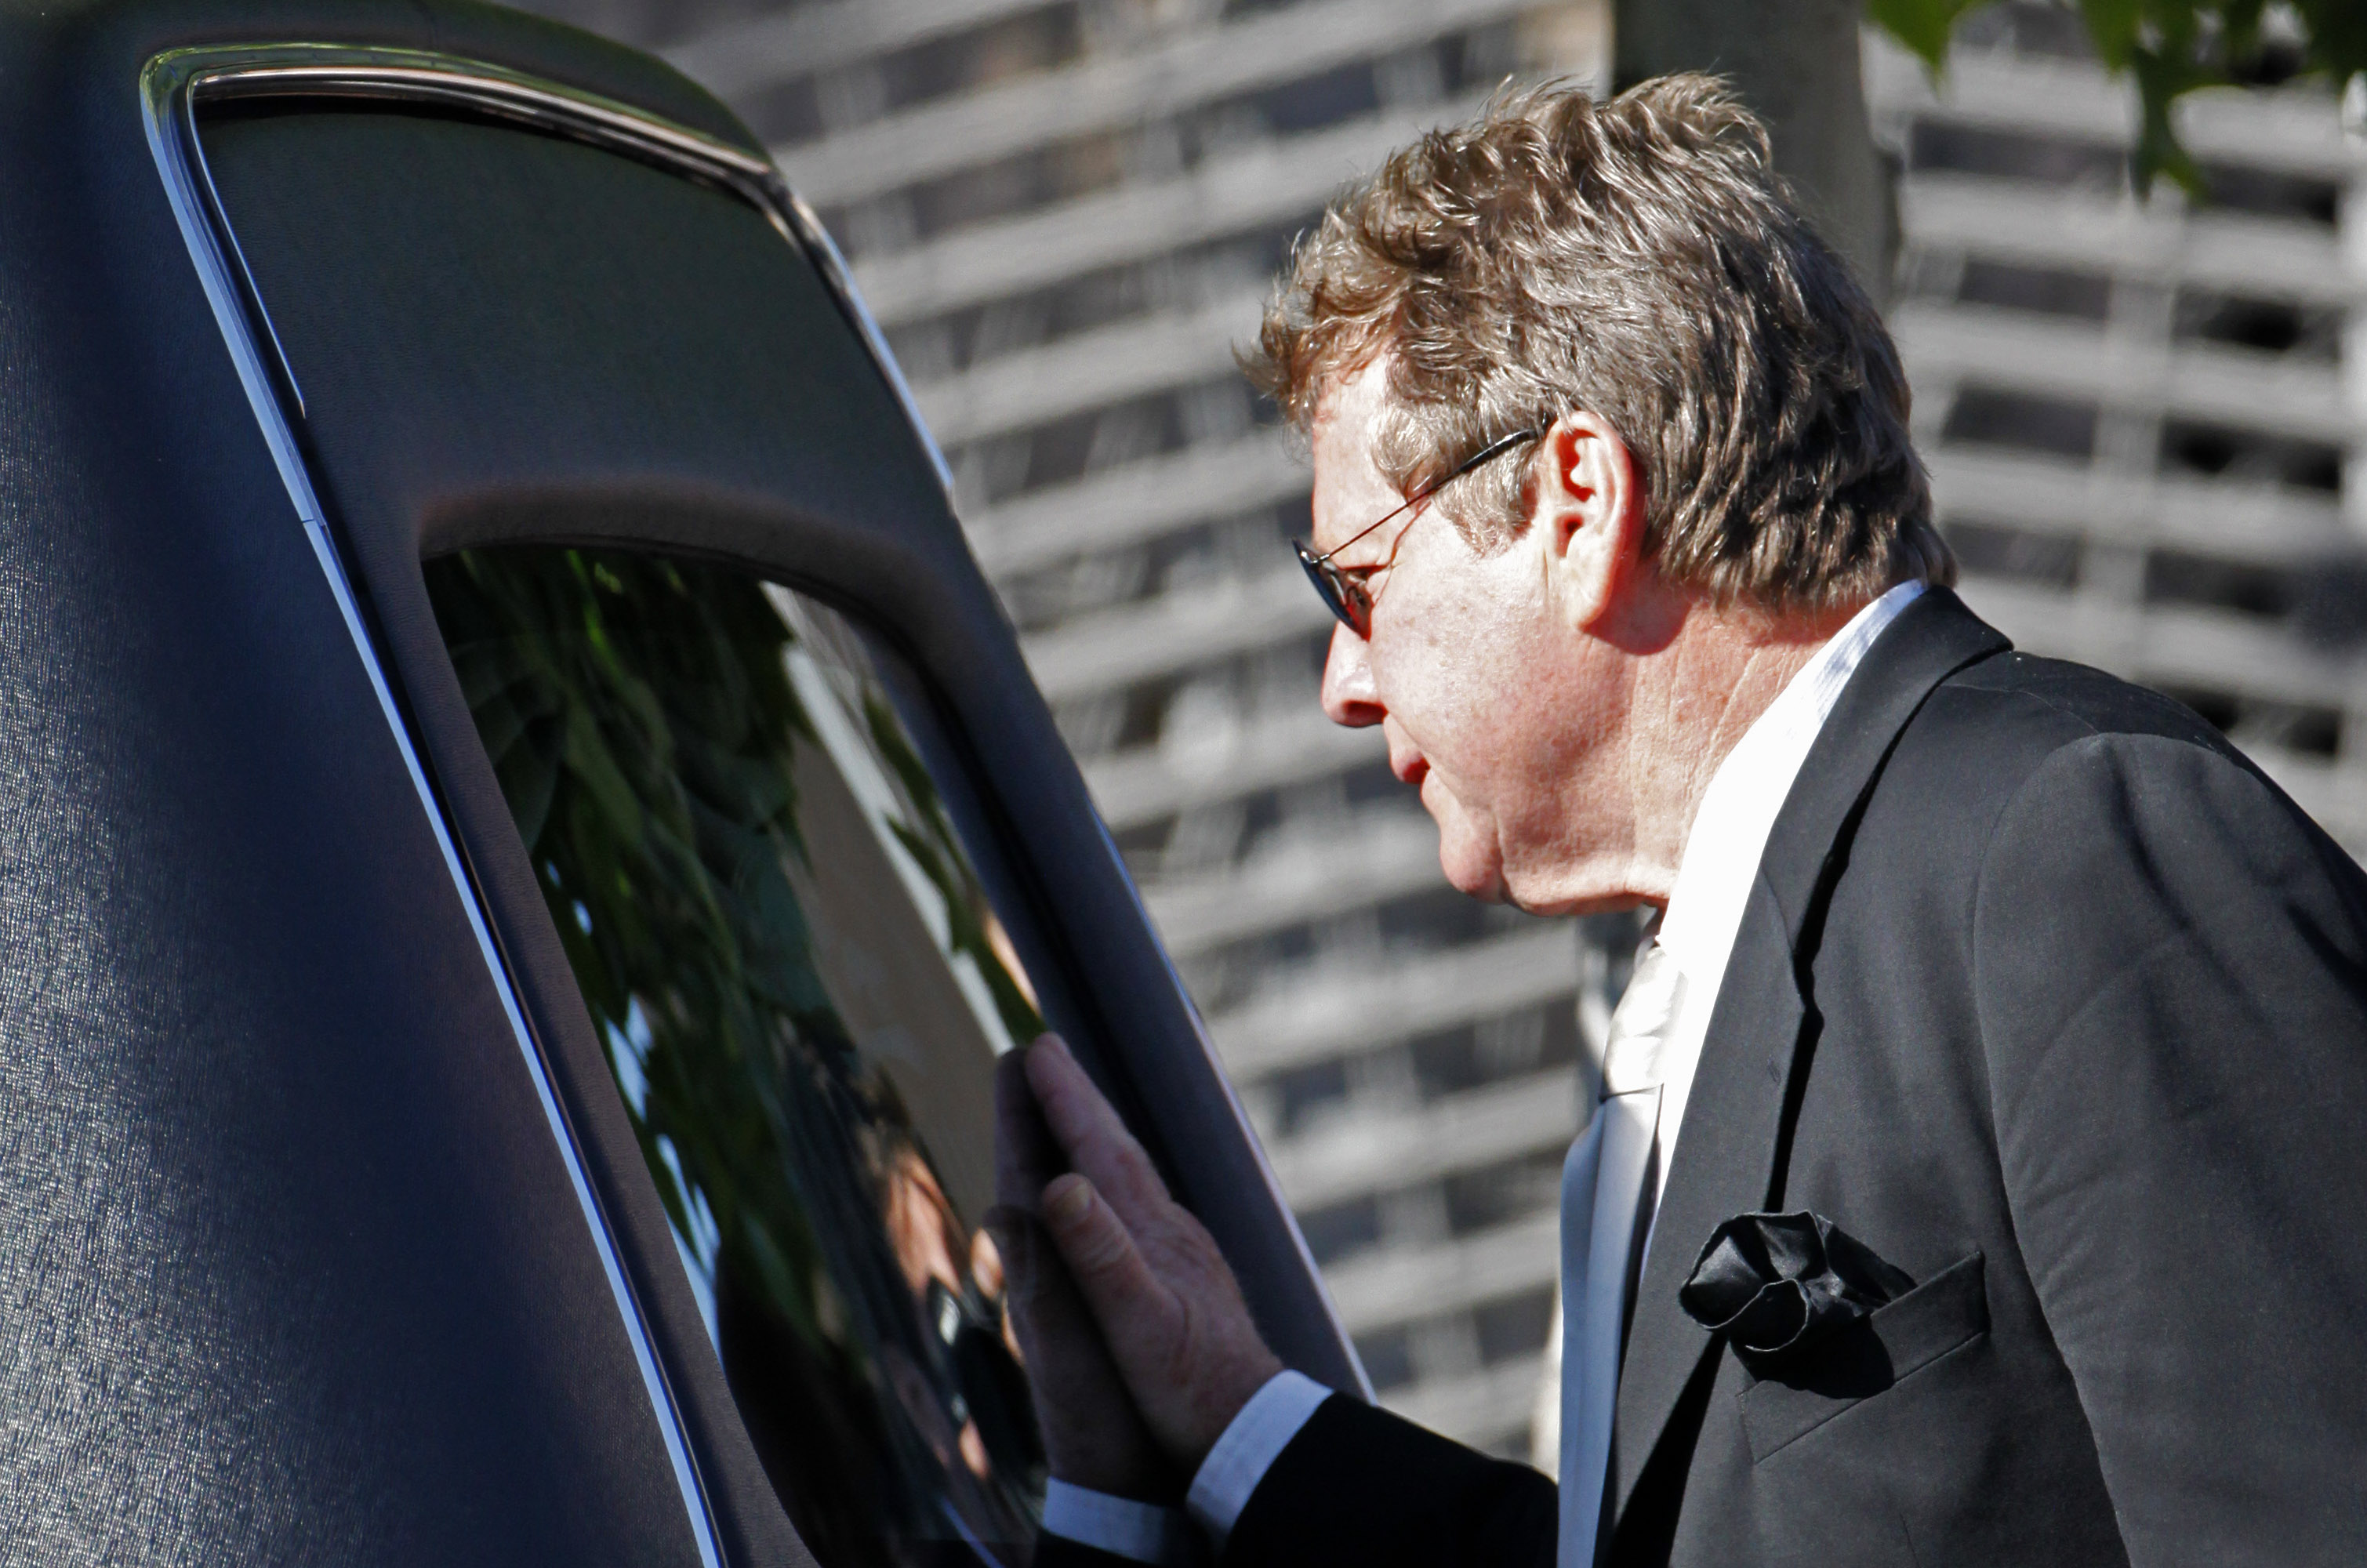 Ryan O'Neal at Farrah Fawcett's funeral at Cathedral of Our Lady on June 30, 2009, in Los Angeles, California | Source: Getty Images